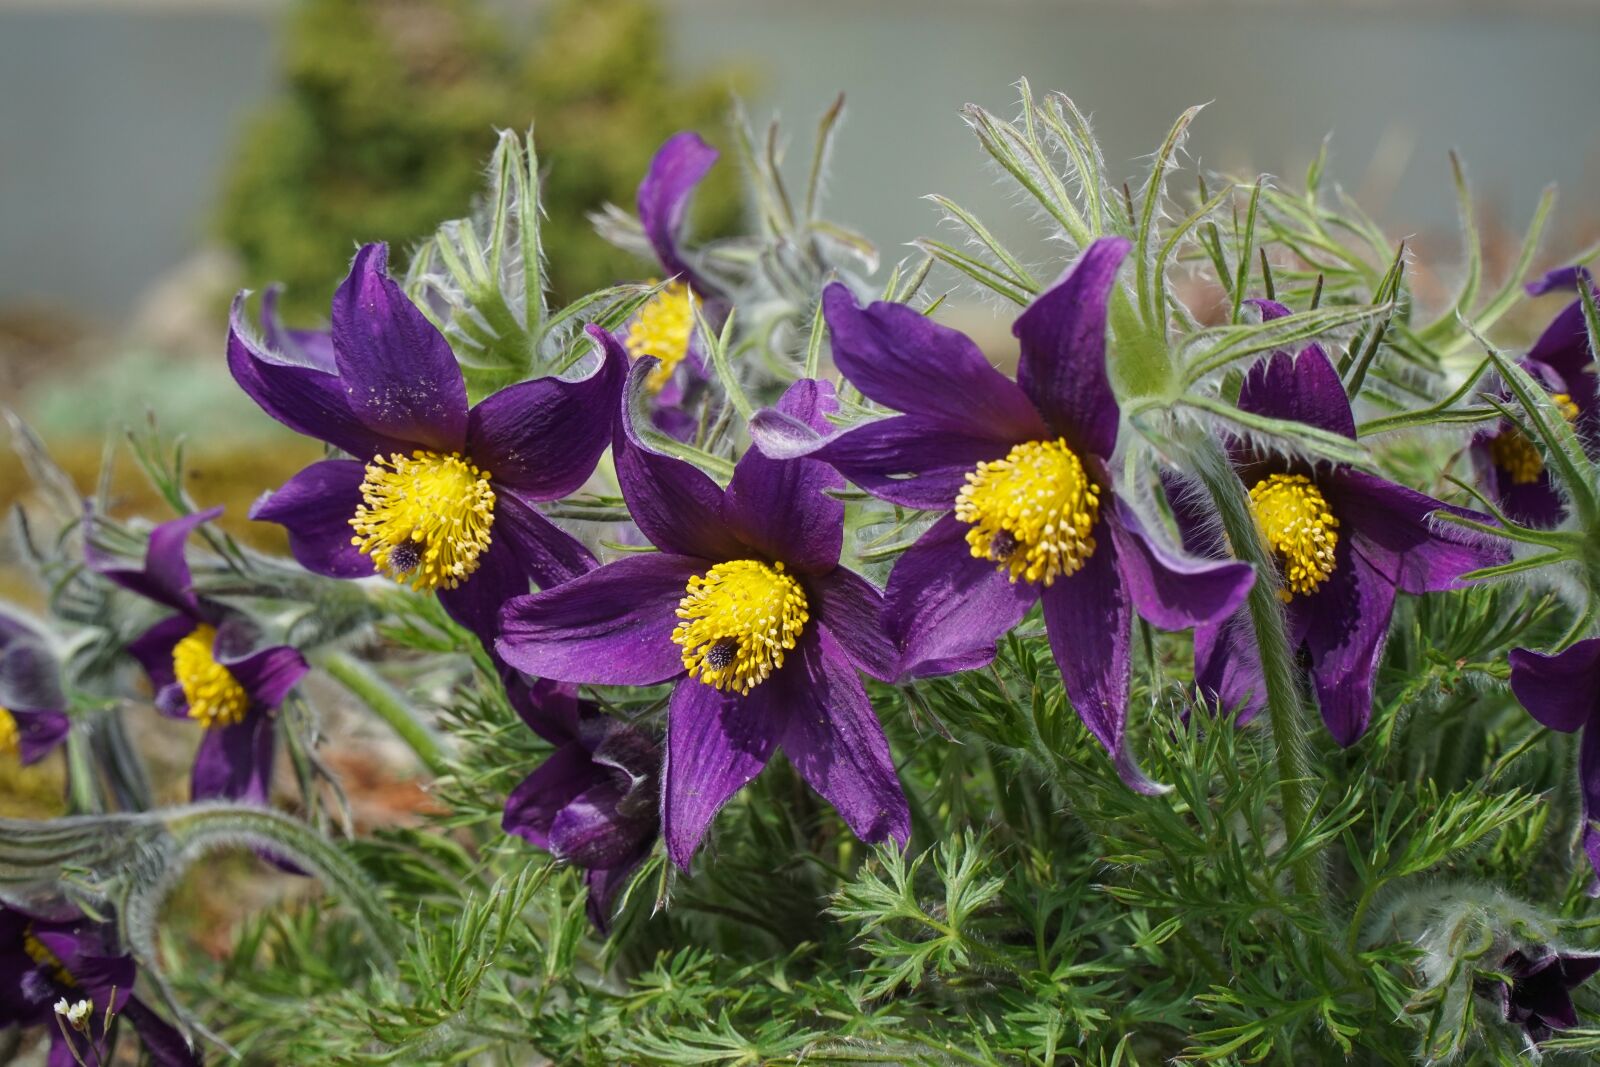 Sony a6000 sample photo. Pasque flower, flower, violet photography